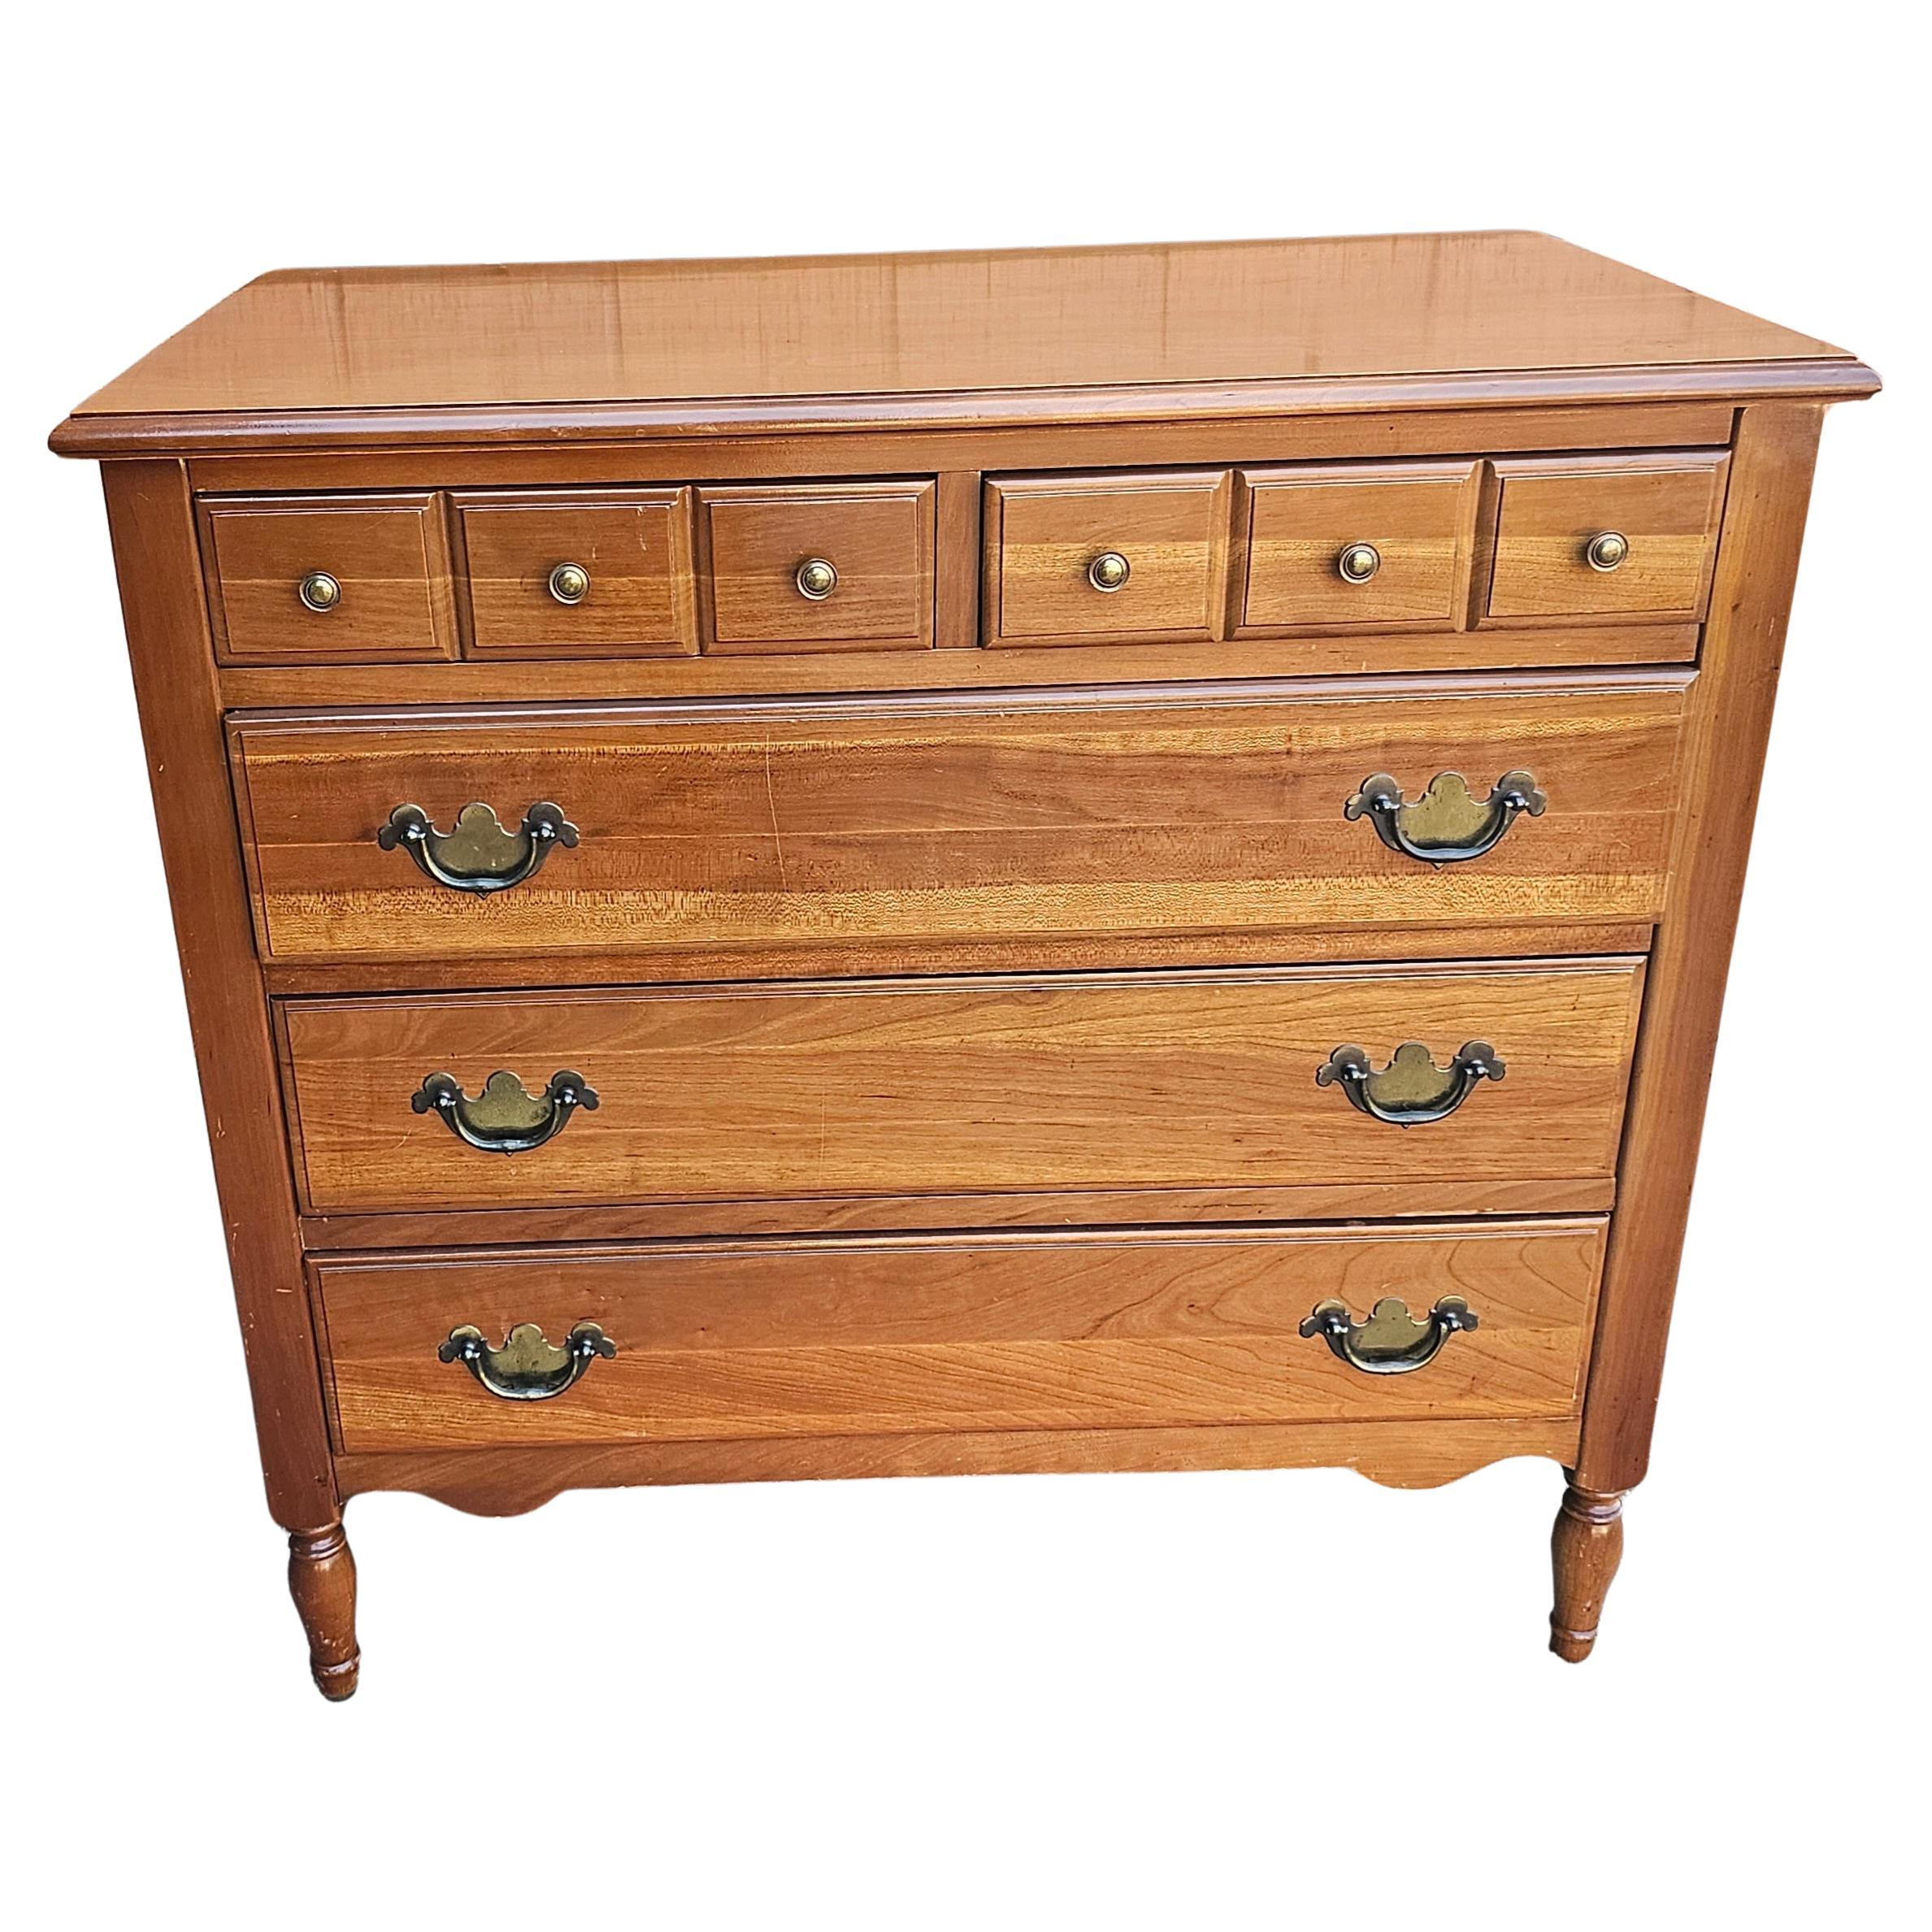 Mid 20th C. Permacraft Sanford Furniture Five-Drawer Bachelor Chest of Drawers